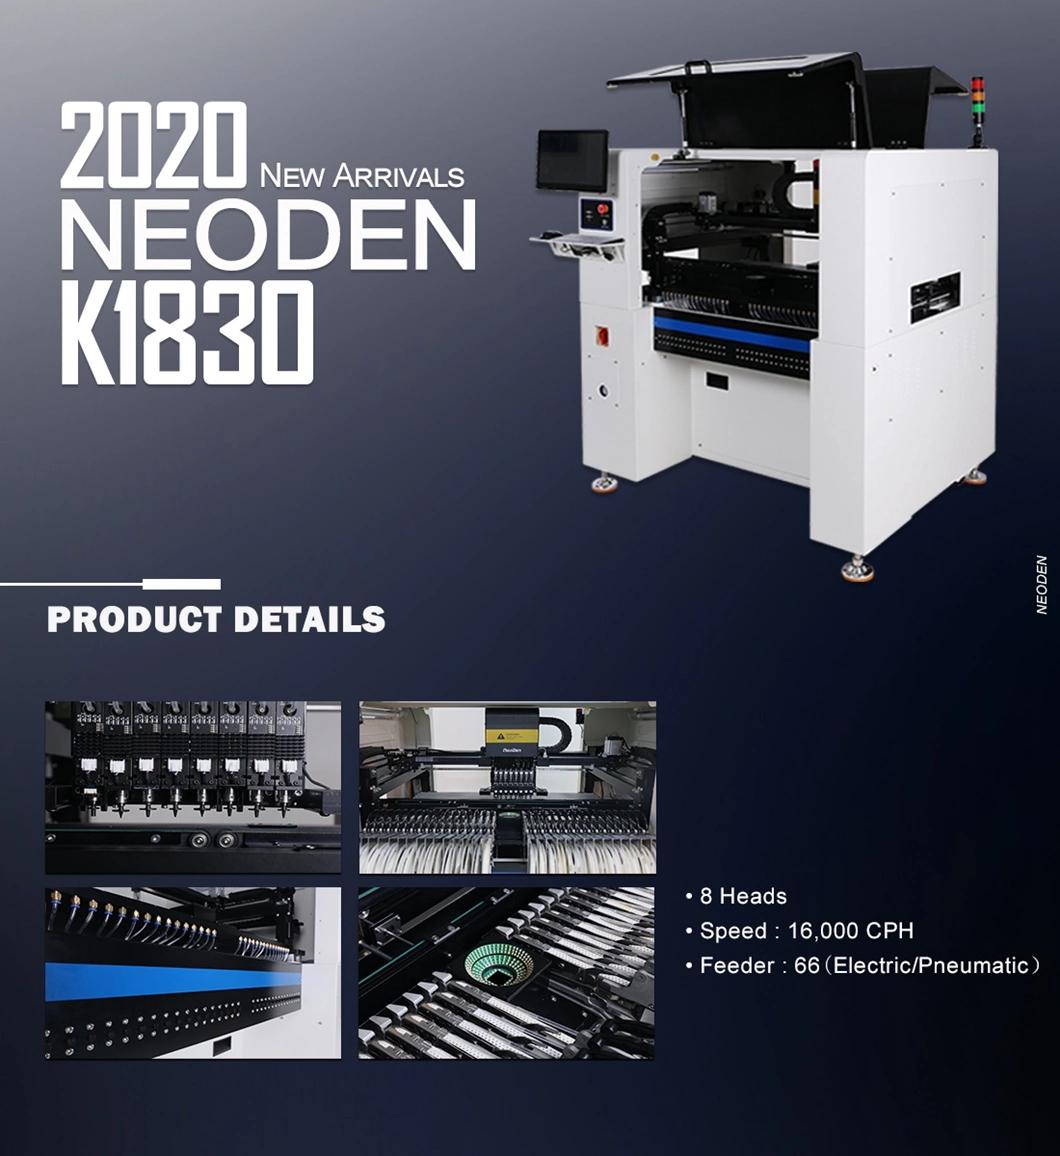 8 Nozzle Head SMD Pick and Place Machine (Neoden K1830) with 66 SMT Feeders for PCB Prototype and SMT Assembly